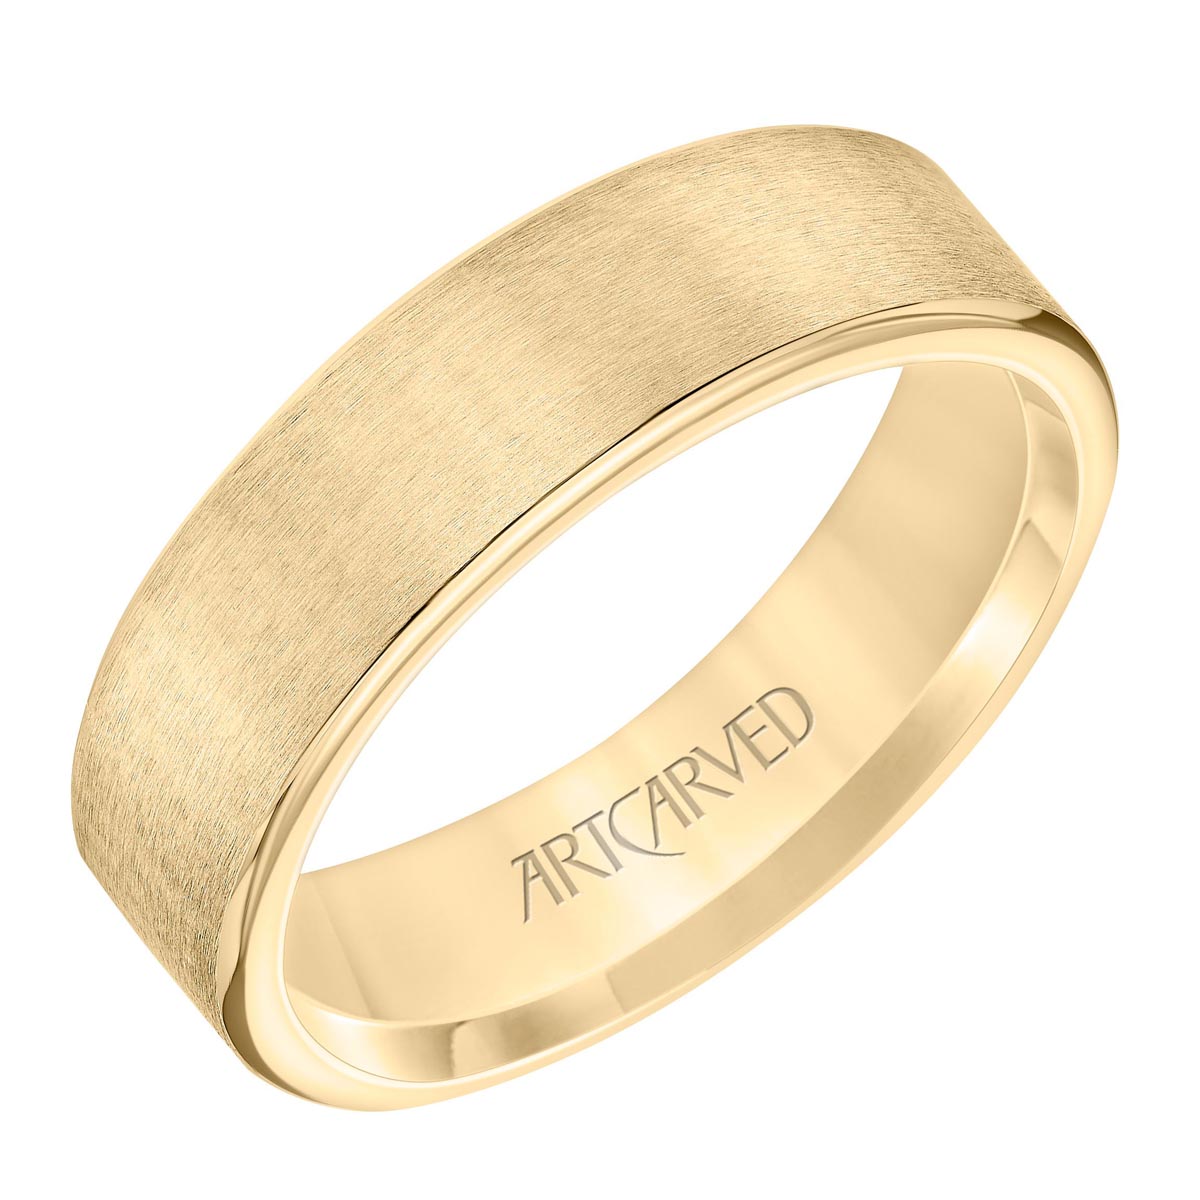 Men's Wedding Band in 14kt Yellow Gold (6mm)